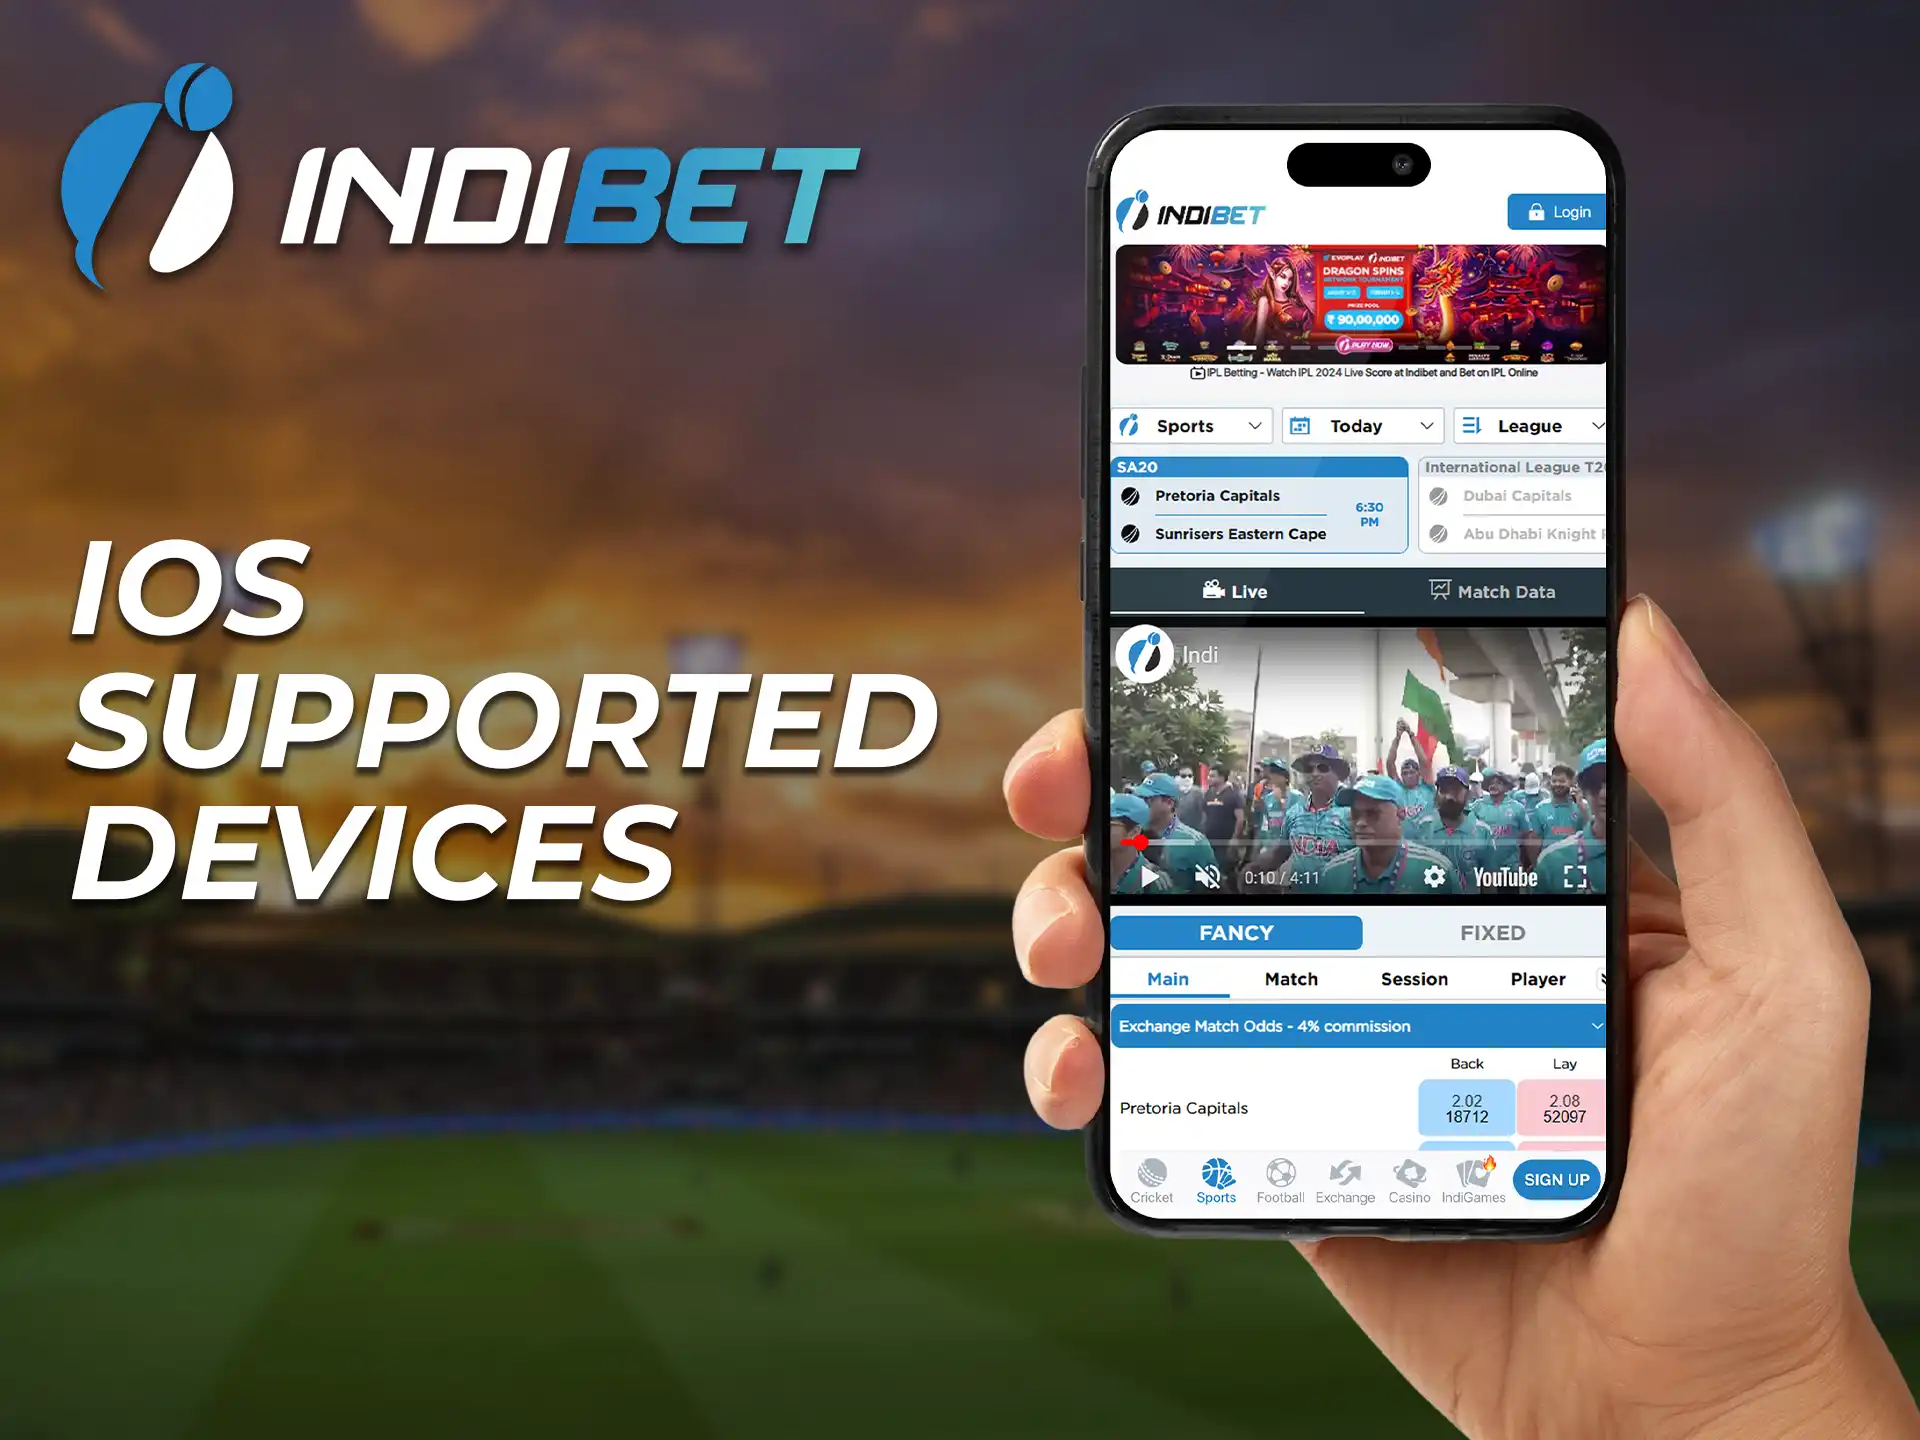 The Indibet app is being tested on popular iOS devices.